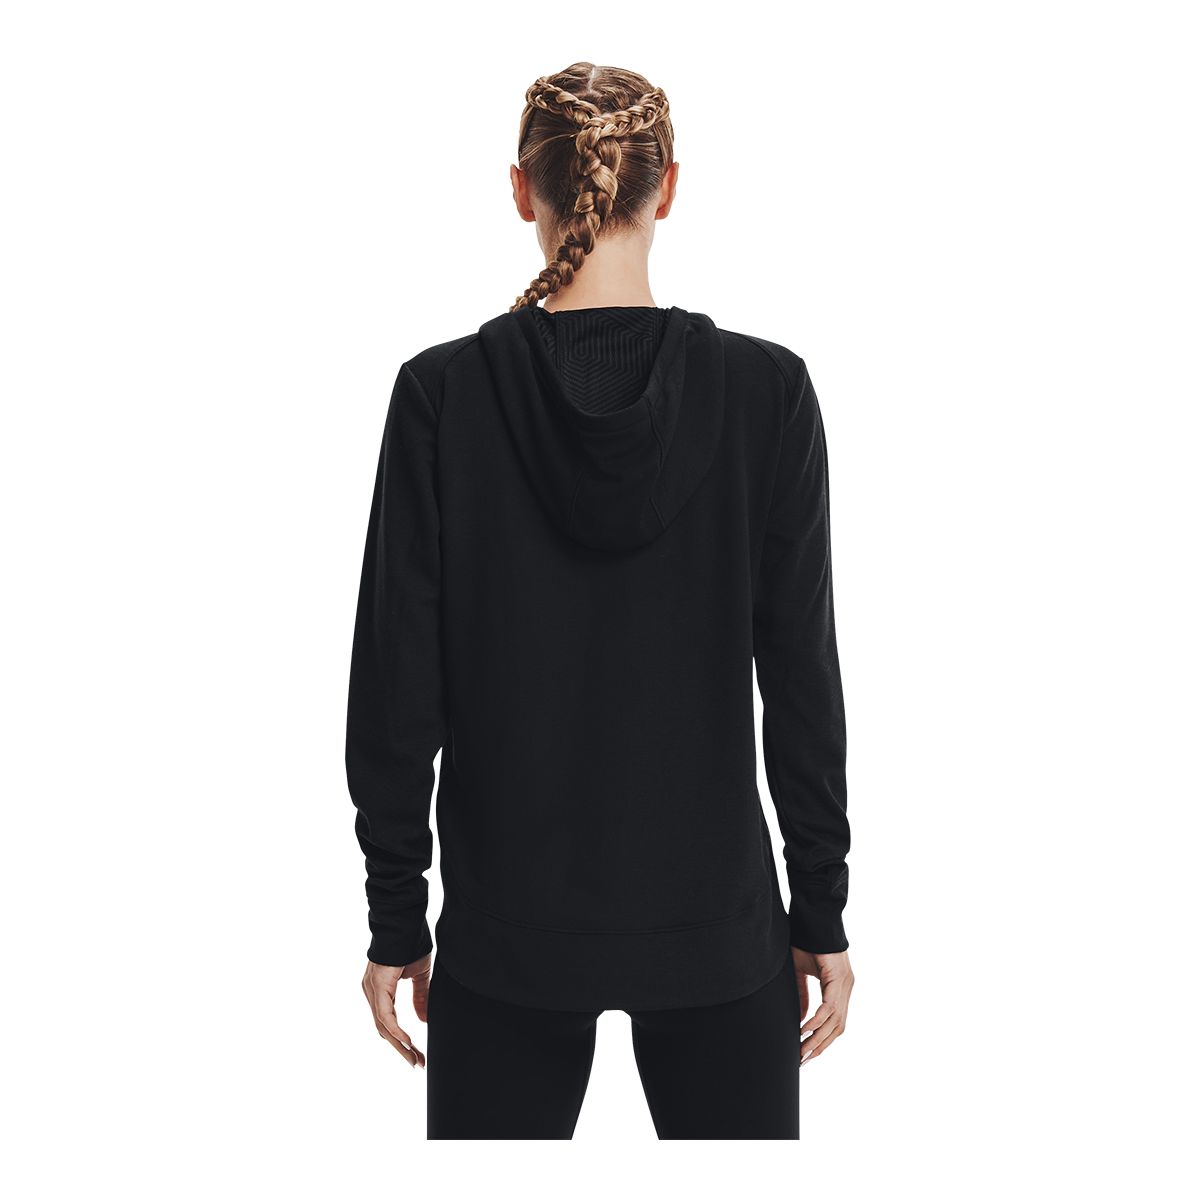 https://media-www.sportchek.ca/product/div-03-softgoods/dpt-72-casual-clothing/sdpt-02-womens/333485128/under-armour-women-s-coldgear-infrared-pullover-hoodie-anti-odor-fefa63f7-19ee-4aa5-965d-b517c6fa2d31-jpgrendition.jpg?imdensity=1&imwidth=1244&impolicy=mZoom